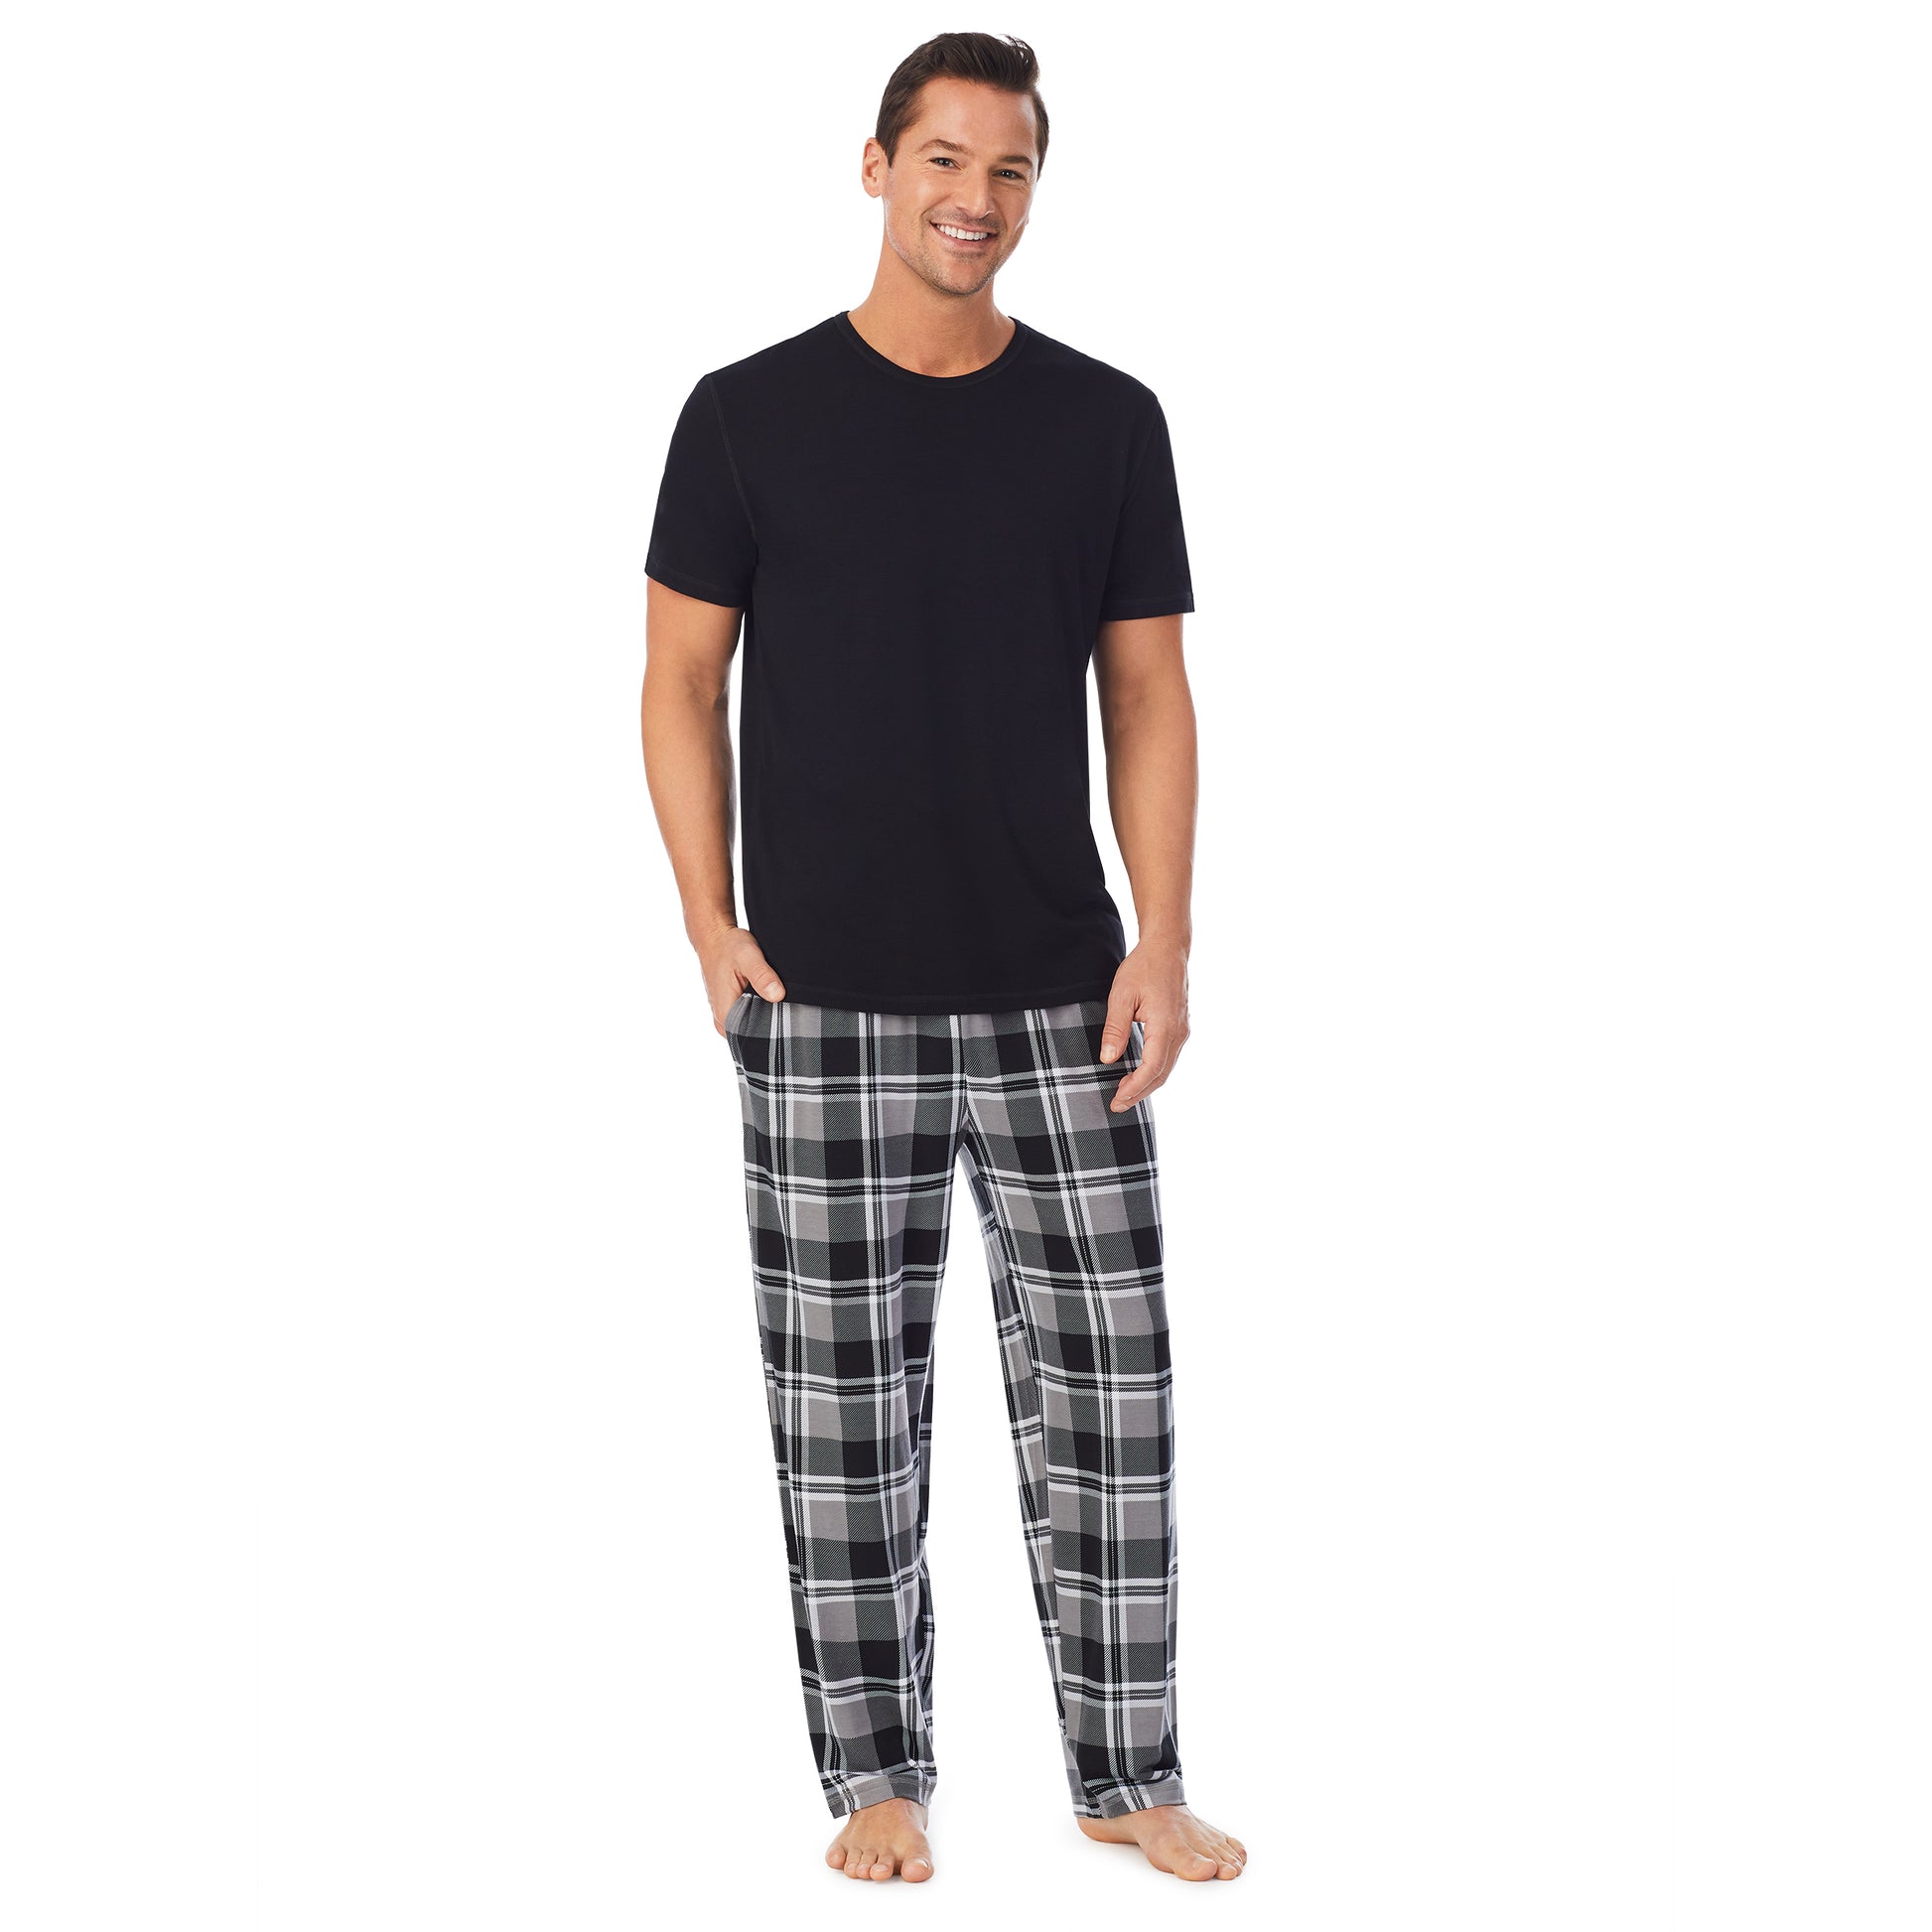 Red Plaid;Model is wearing size M. He is 6'2", Waist 32", Inseam 32".@ A lady wearingMens Short Sleeve Crew Neck Top and Pant Pajama Set with Red Plaid print